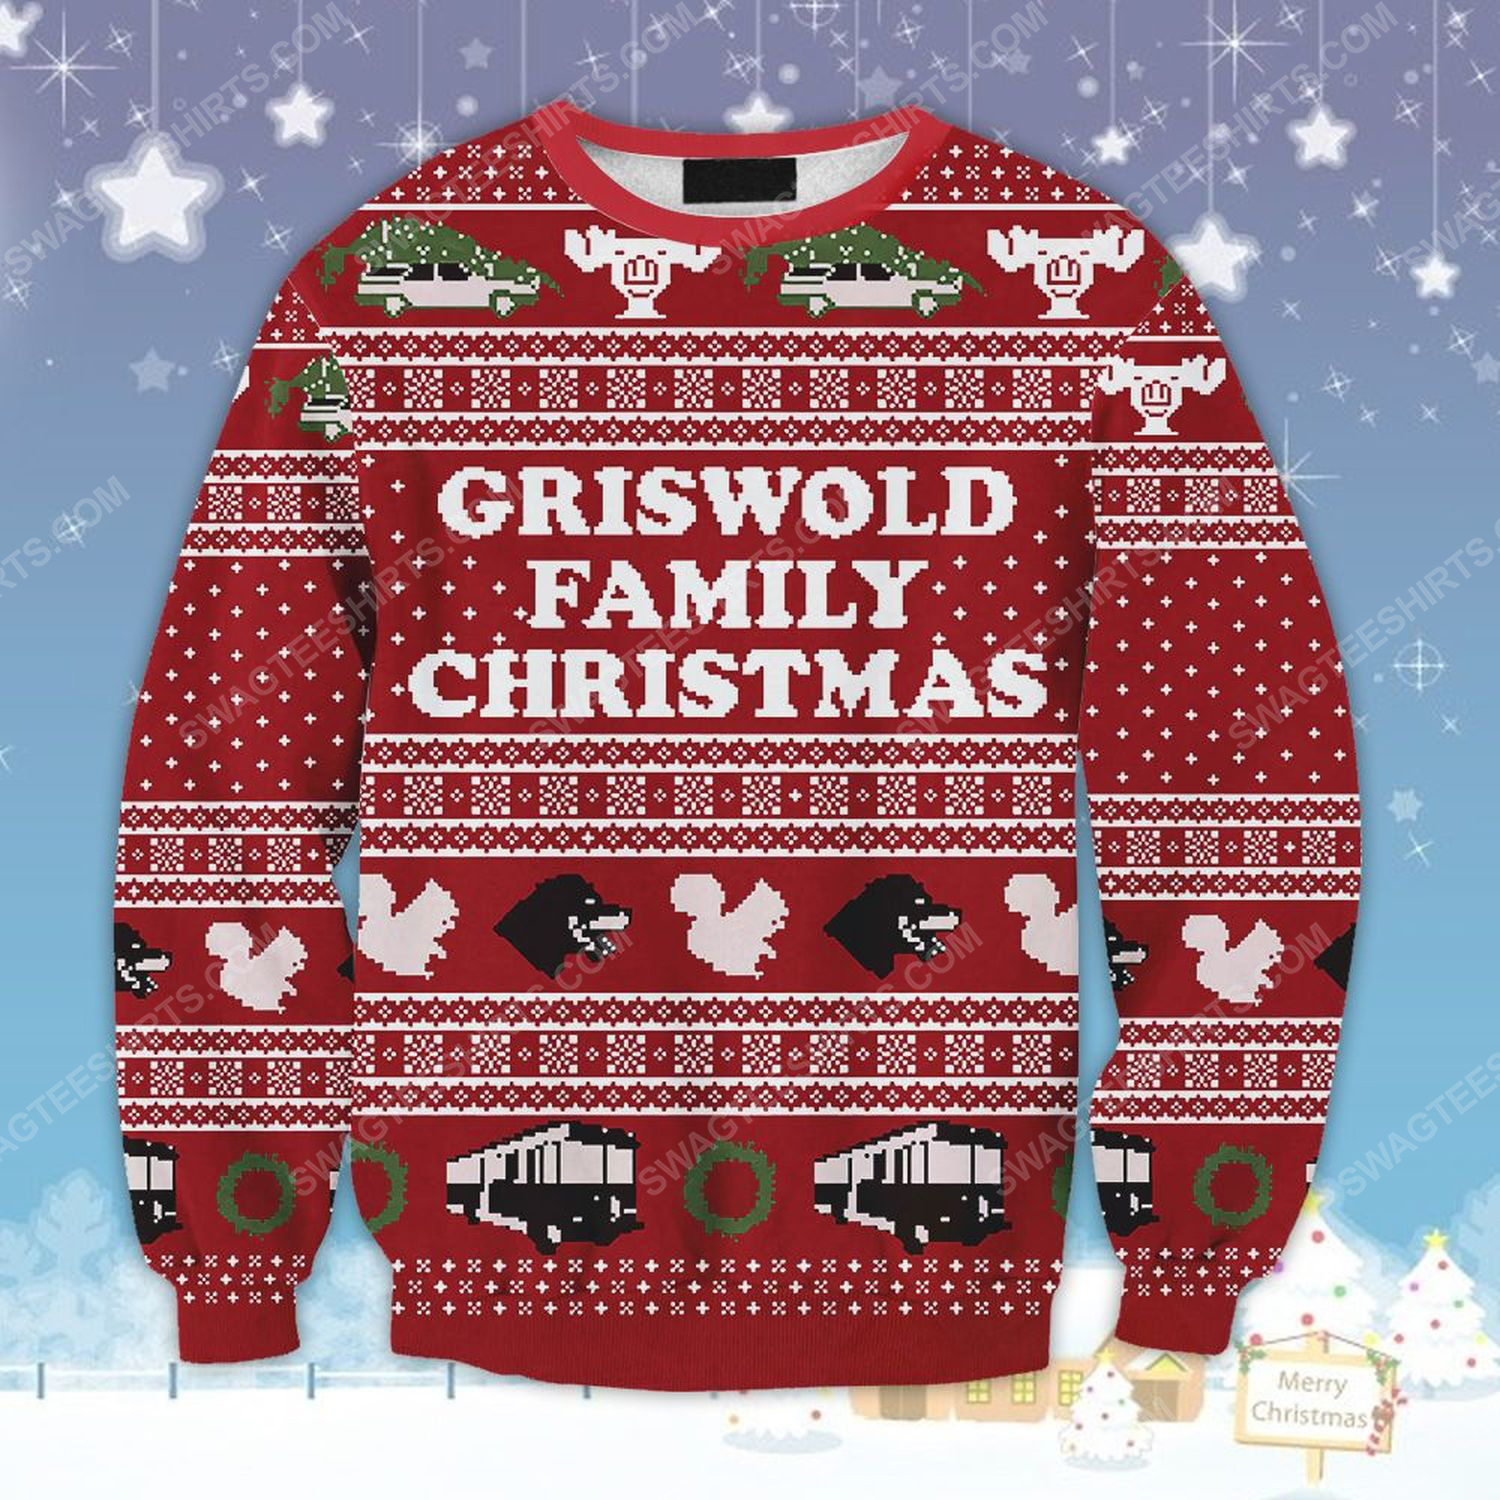 National lampoon's vacation griswold family ugly christmas sweater - Copy (2)